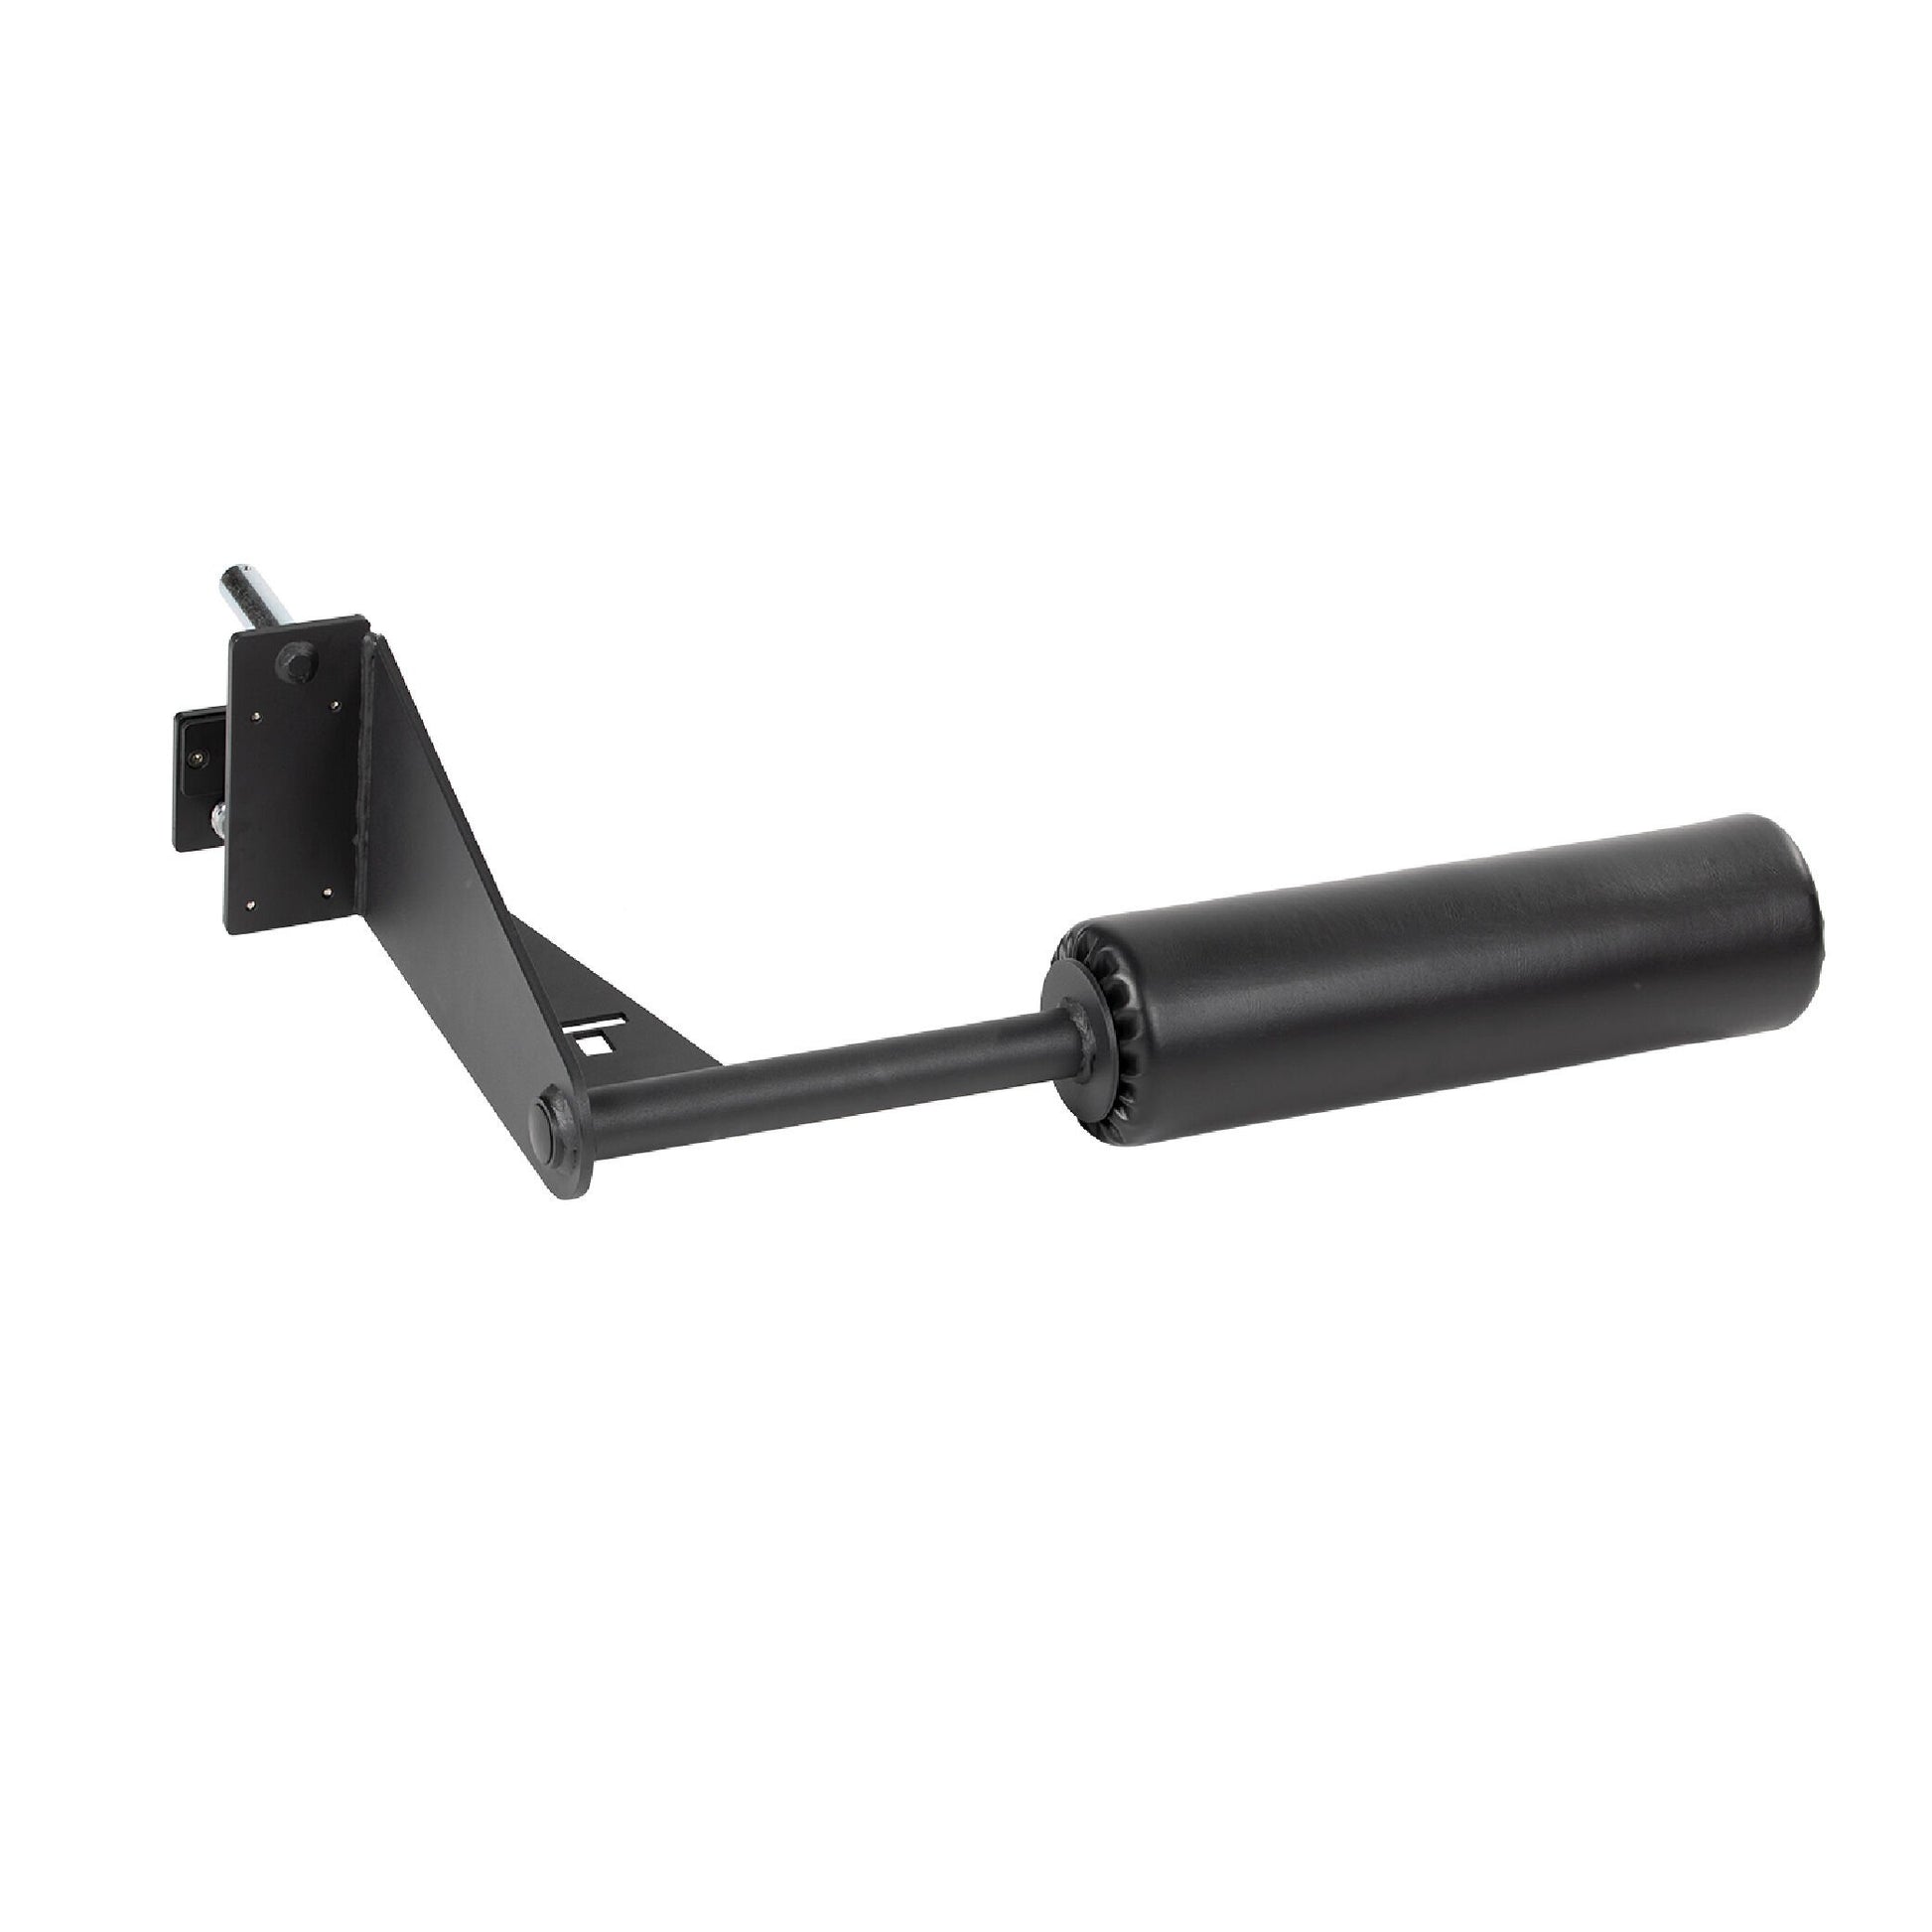 SCRATCH AND DENT - Rack Mount Leg Roller and Lat Tower Knee Holder - FINAL SALE